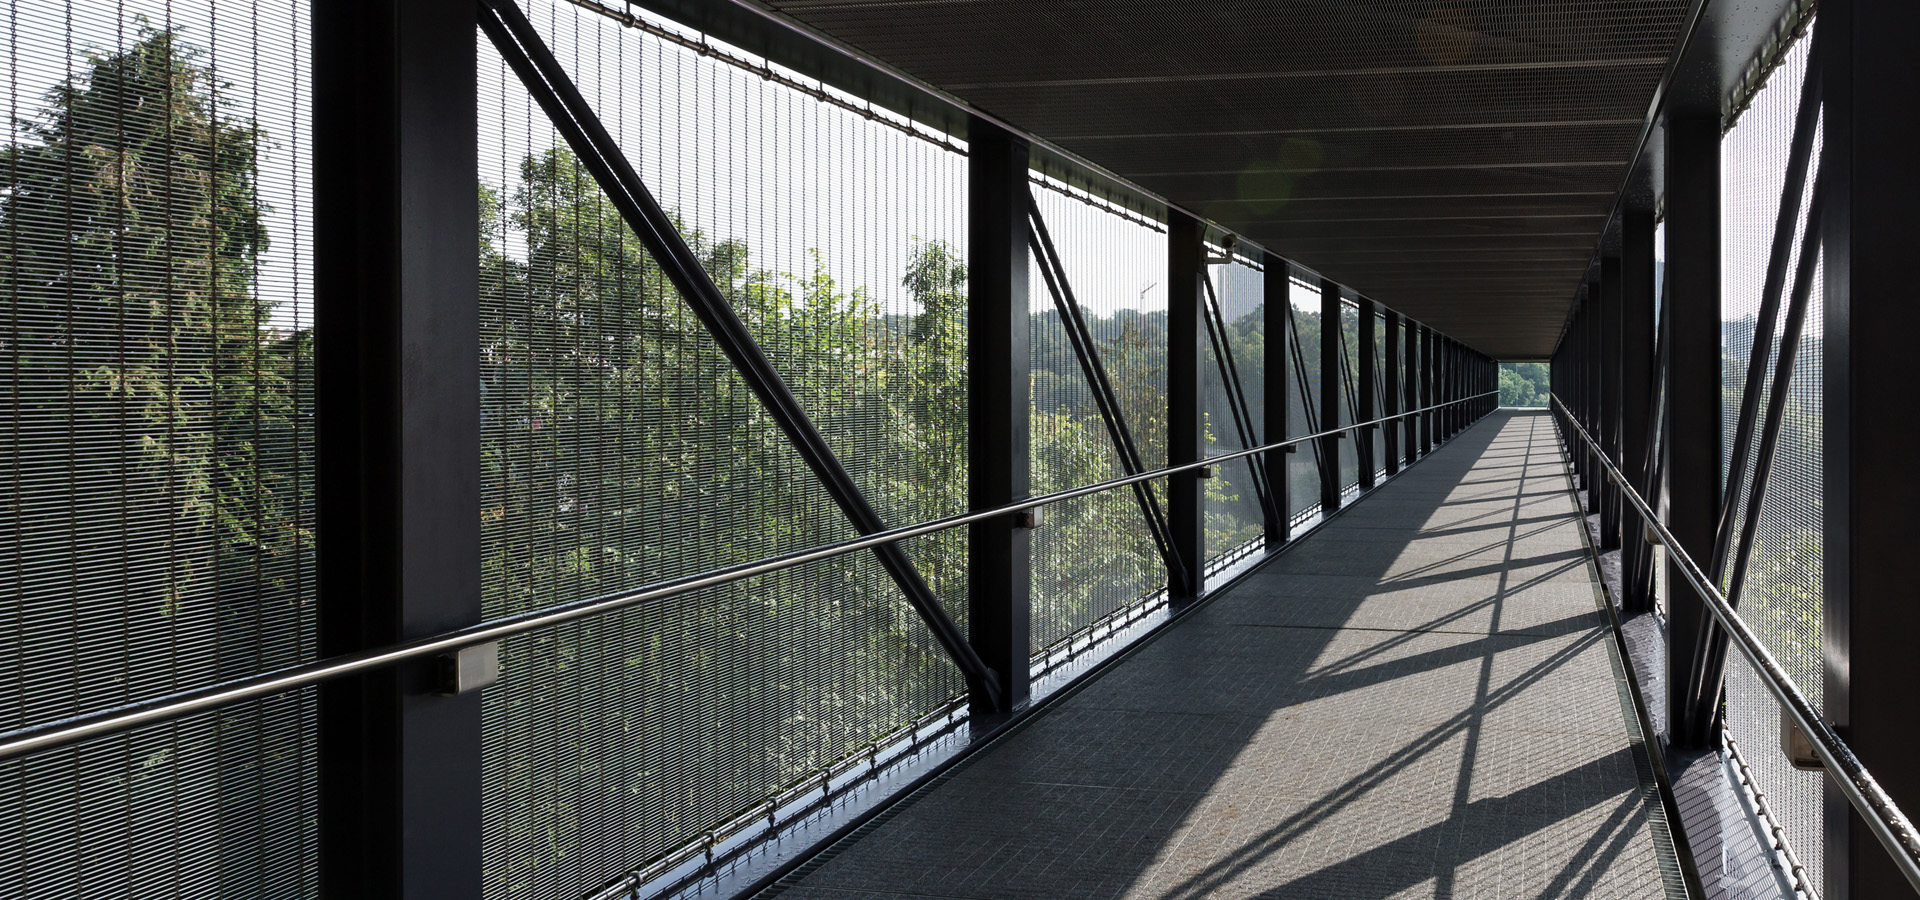 Bridge cladding with HAVER architectural wire mesh as effective fall protection